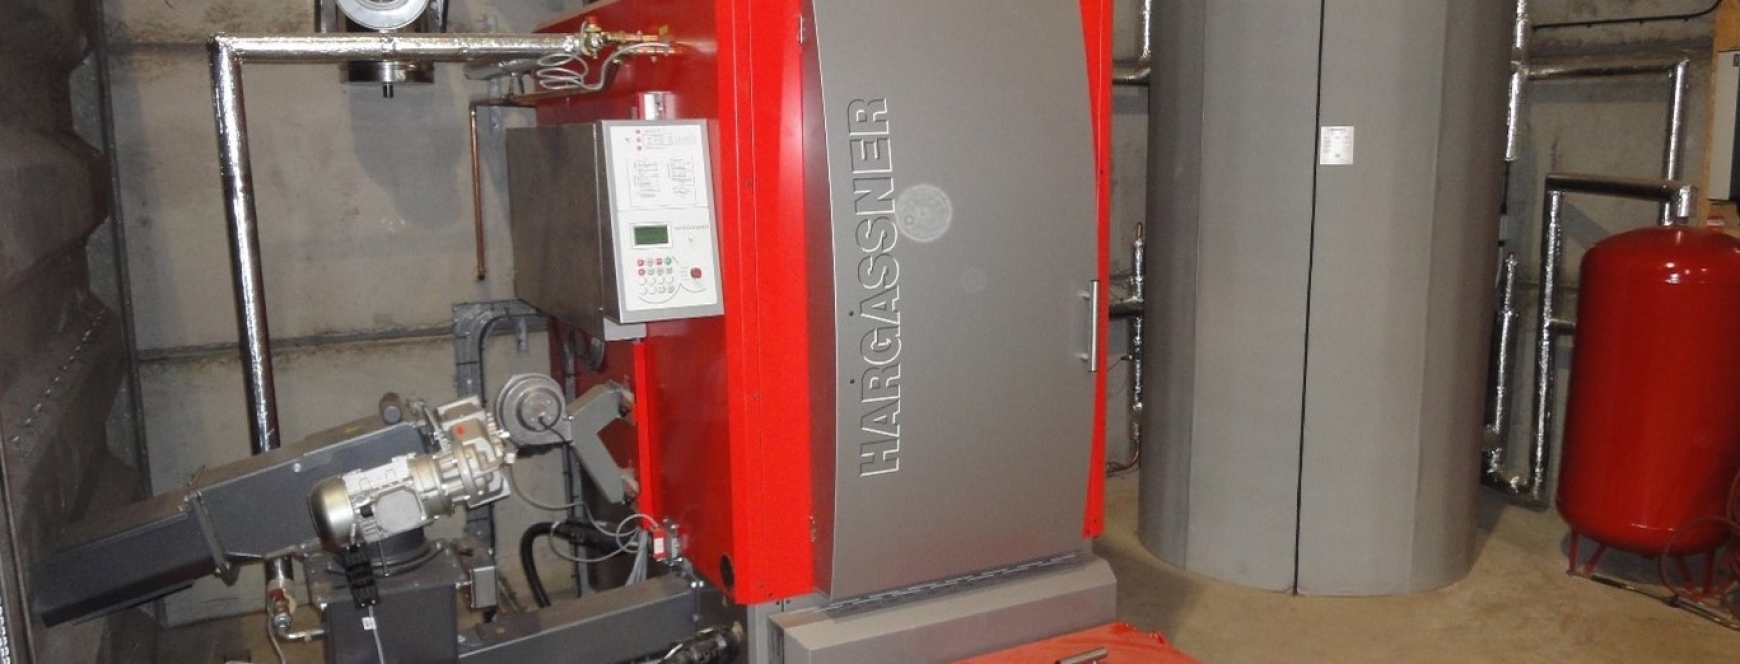 Biomass boiler in a shed